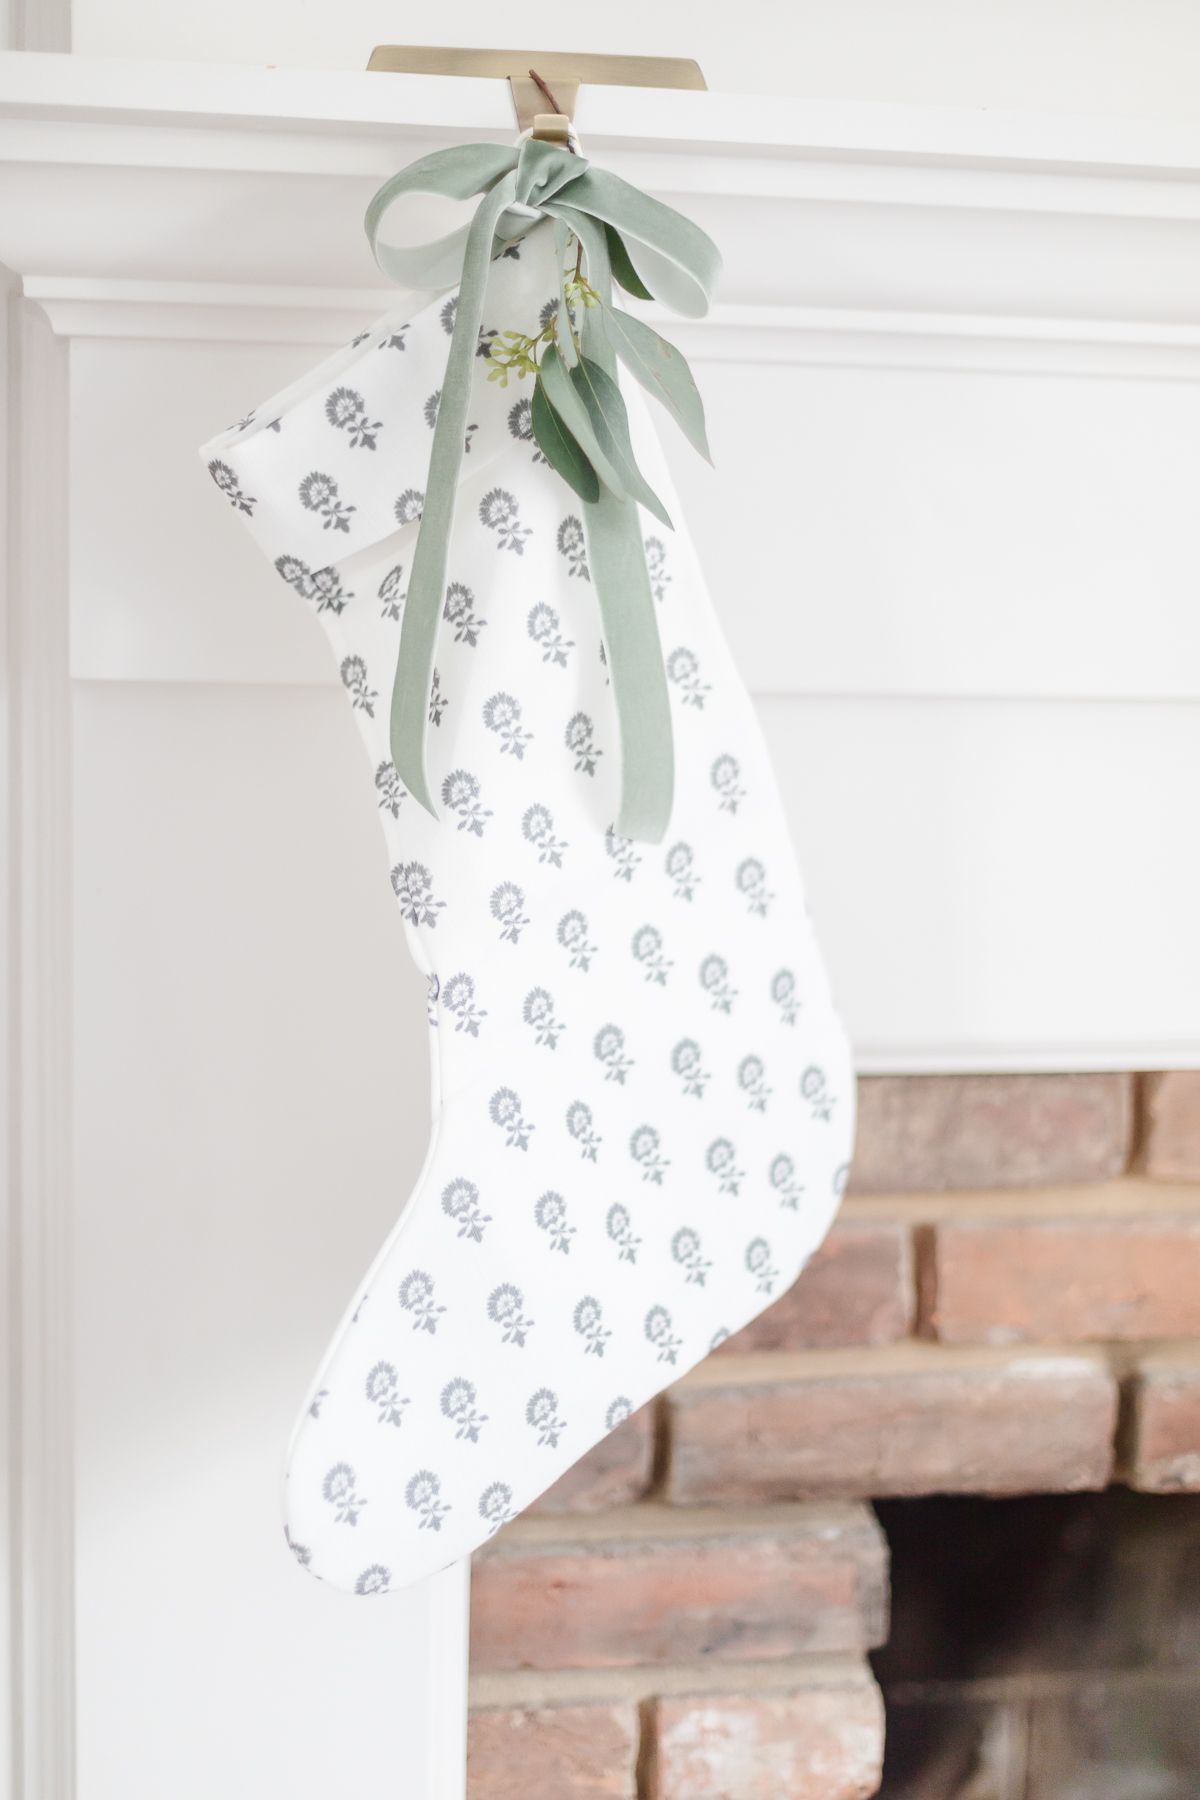 A block print stocking hung with a velvet green ribbon